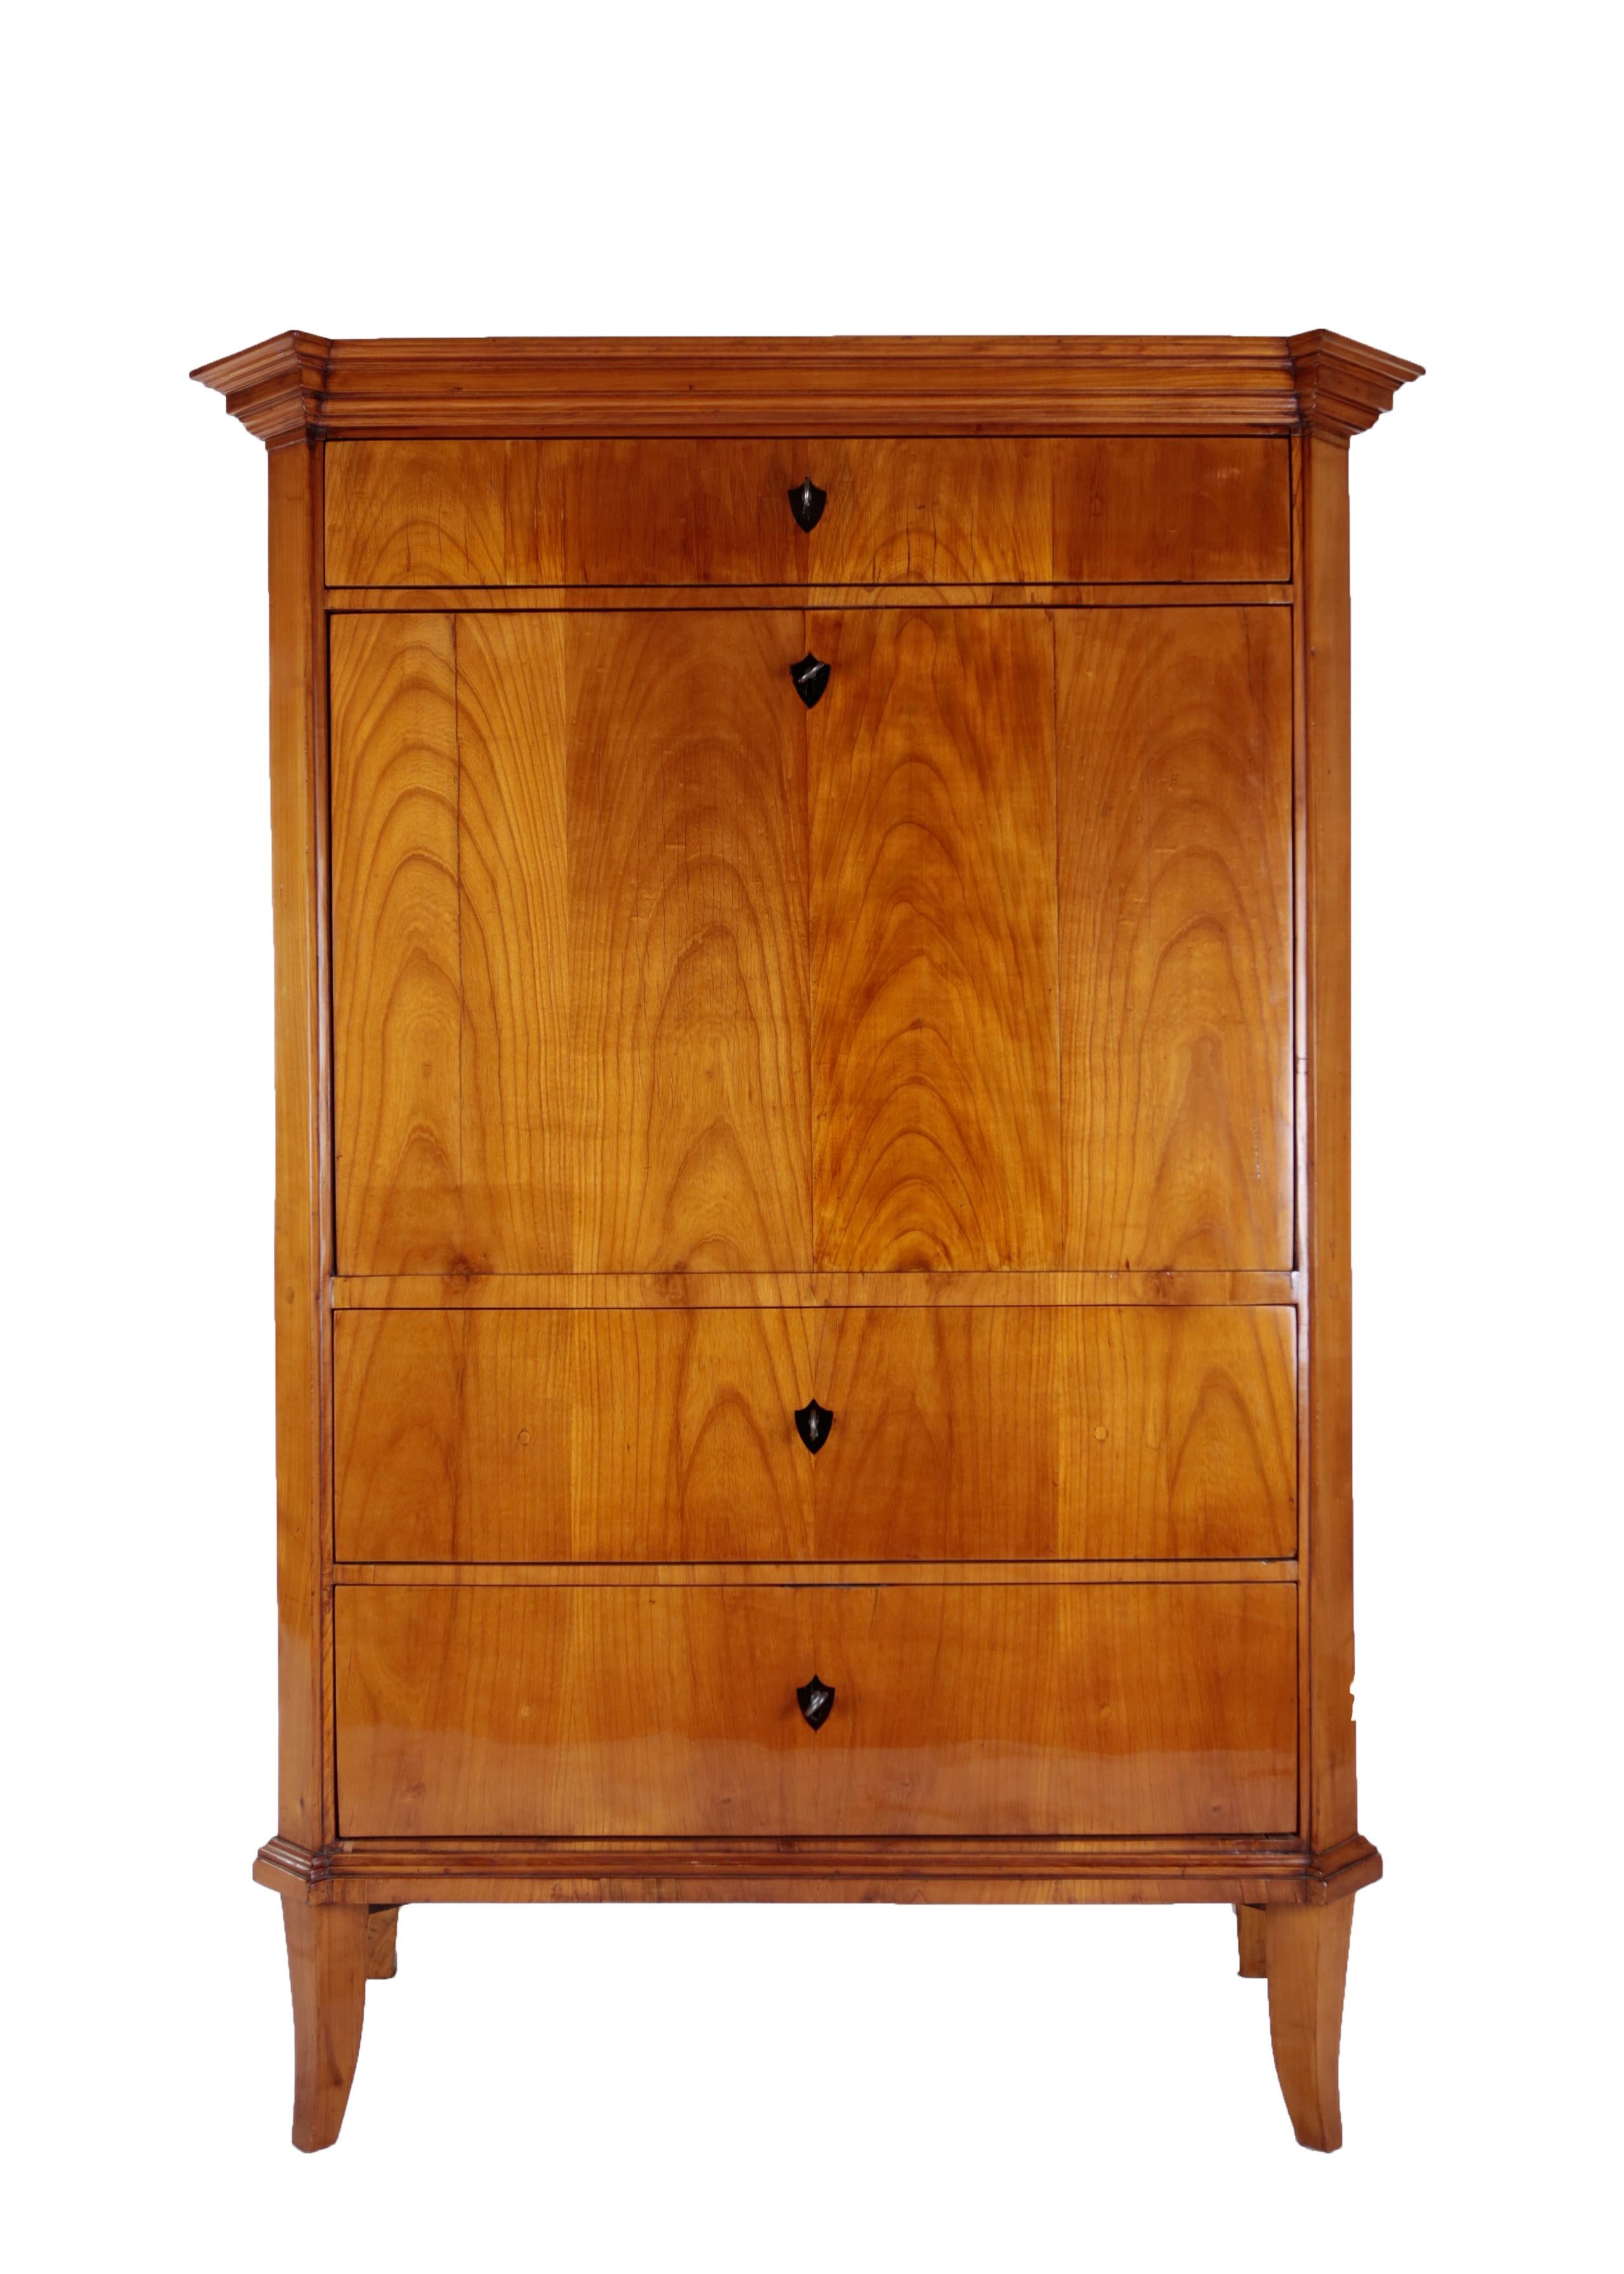 Secretary, circa 1820-1830
cherrywood veneer,
2 spacious drawers on the bottom, 1-drawer on the top,
small drawers with ash veneer on the inside, as well as a mirror and a secret compartment
Restored residential-ready state
French shellac hand